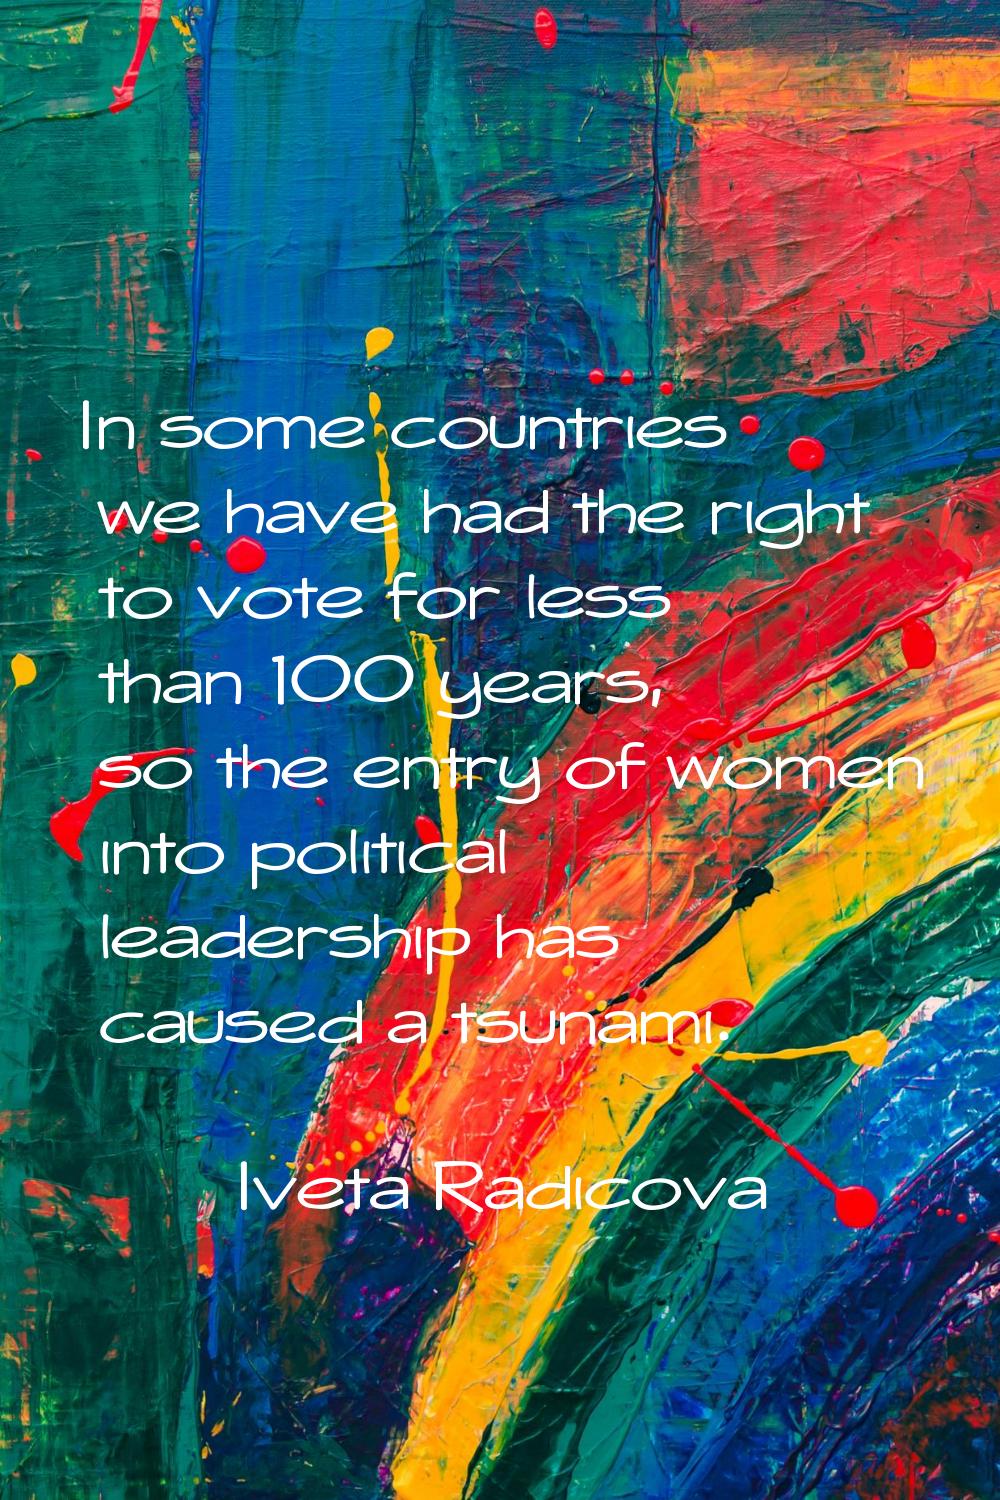 In some countries we have had the right to vote for less than 100 years, so the entry of women into